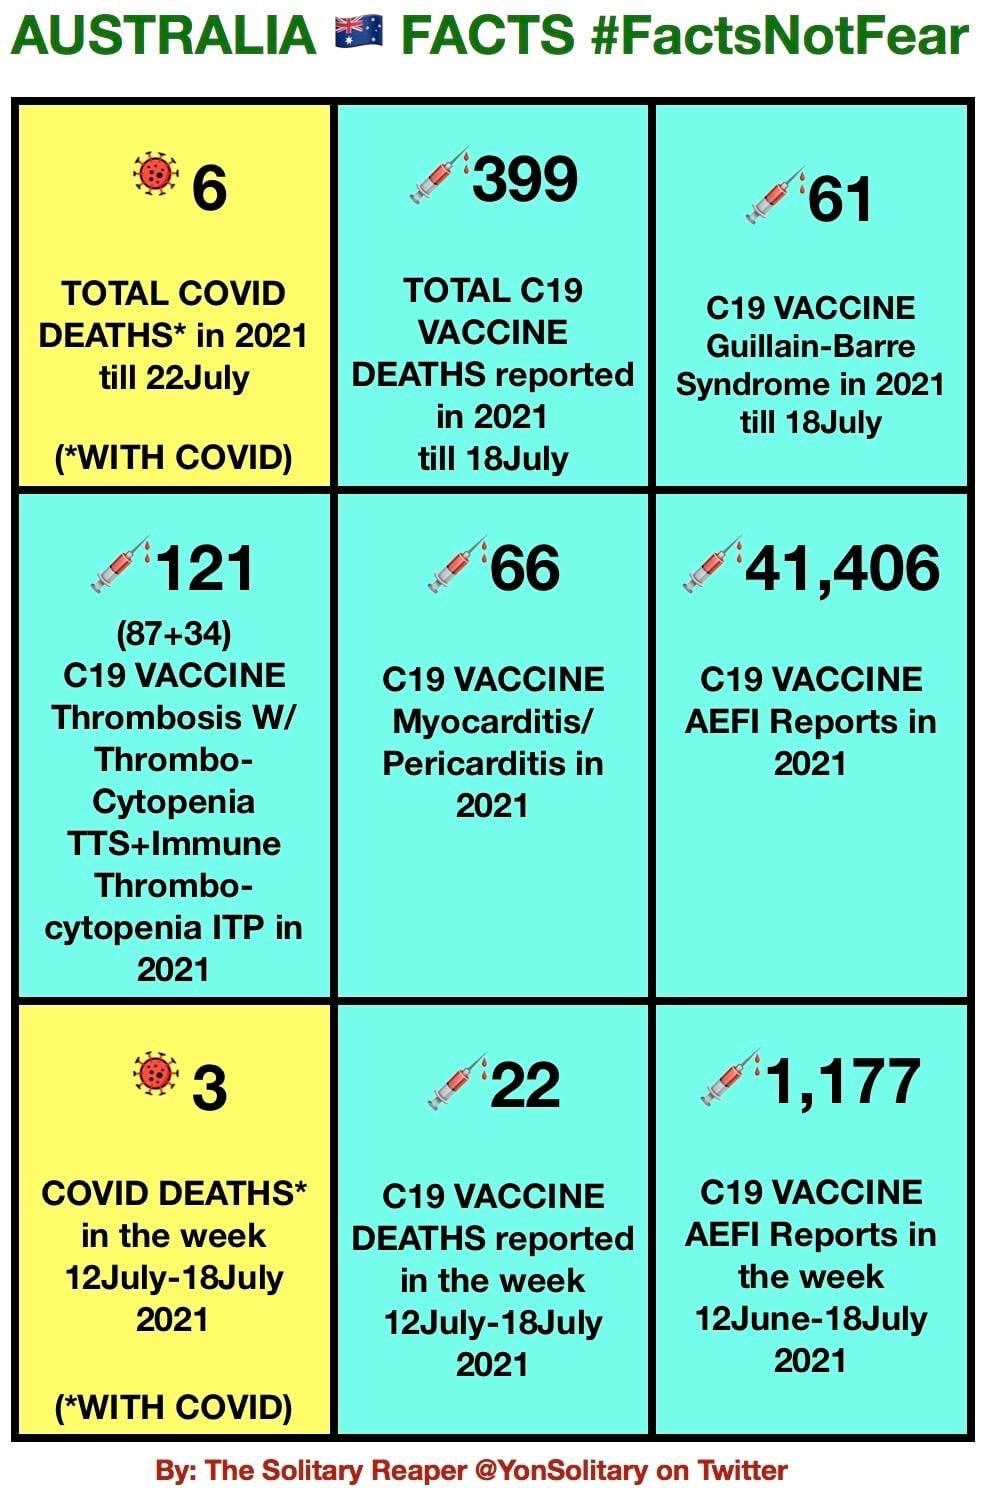 May be an image of text that says 'AUSTRALIA FACTS #FactsNotFear 399 TOTAL COVID DEATHS* in 2021 till 22July 61 TOTAL C19 VACCINE DEATHS reported in 2021 till 18July (*WITH COVID) C19 VACCINE Guillain Guillain-Barre Syndrome in 2021 till 18July 66 41,406 121 (87+34) C19 VACCINE Thrombosis W/ Thrombo- Cytopenia TTS+Immune Thrombo- cytopenia ITP in 2021 C19 VACCINE Myocarditis/ Pericarditis in 2021 C19 VACCINE AEFI Reports in 2021 3 22 COVID DEATHS* in the week 12July-18July 12July- 2021 1,177 C19 VACCINE DEATHS reported in the week 12July-18July 2021 C19 VACCINE AEFI Reports in the week 12June-18July 2021 (*WITH COVID) By: The Solitary Reaper @YonSolitary on Twitter'